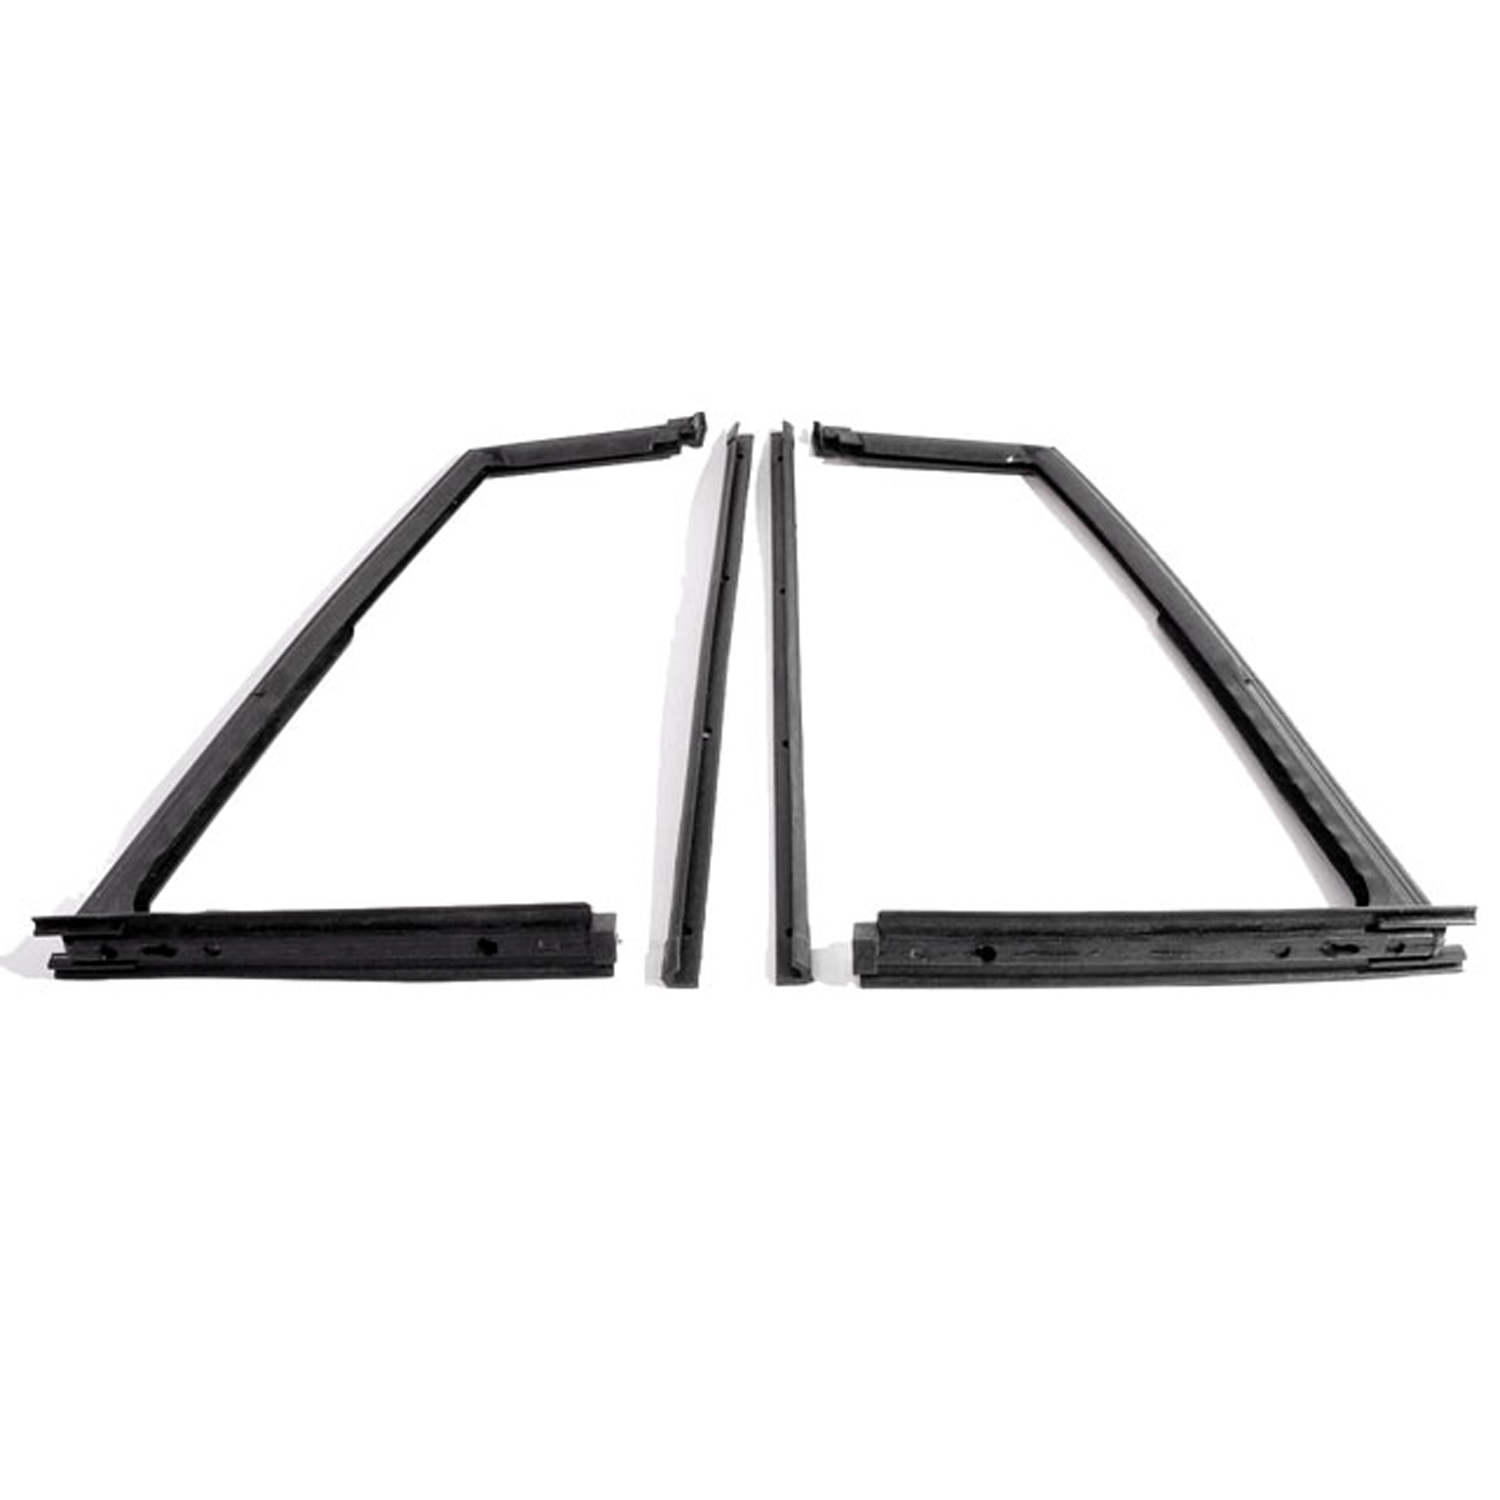 1968 Jeep Jeepster Vent Window Seals.  Pair-WR 9700